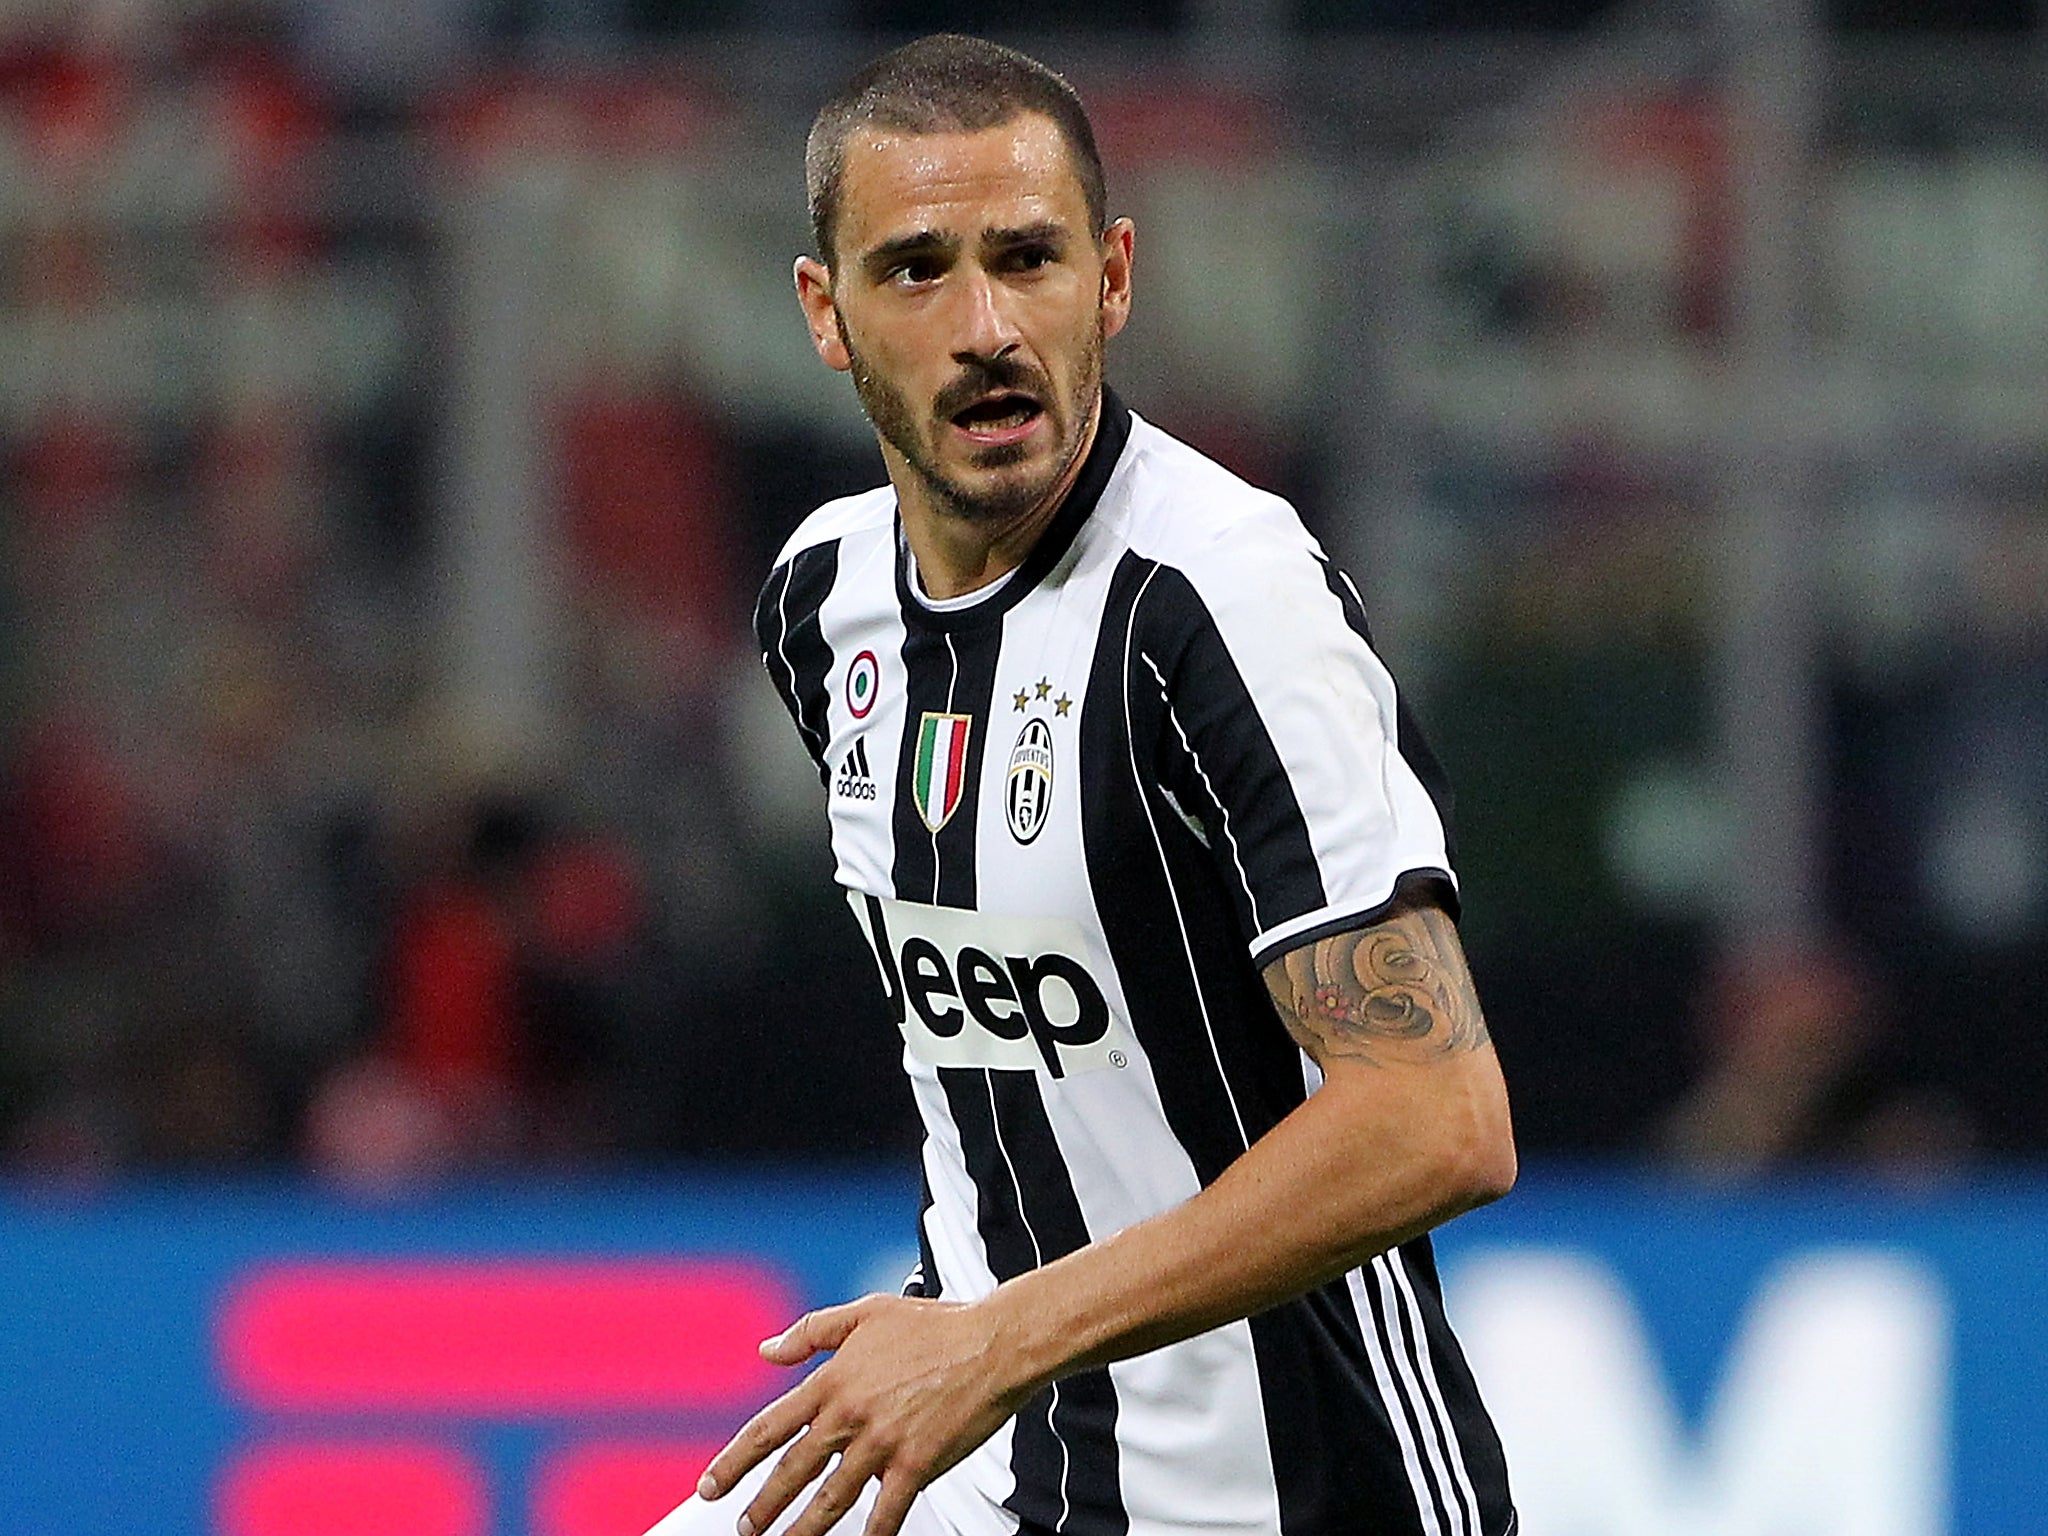 Leonardo Bonucci is considered by many to be the world's finest central defender